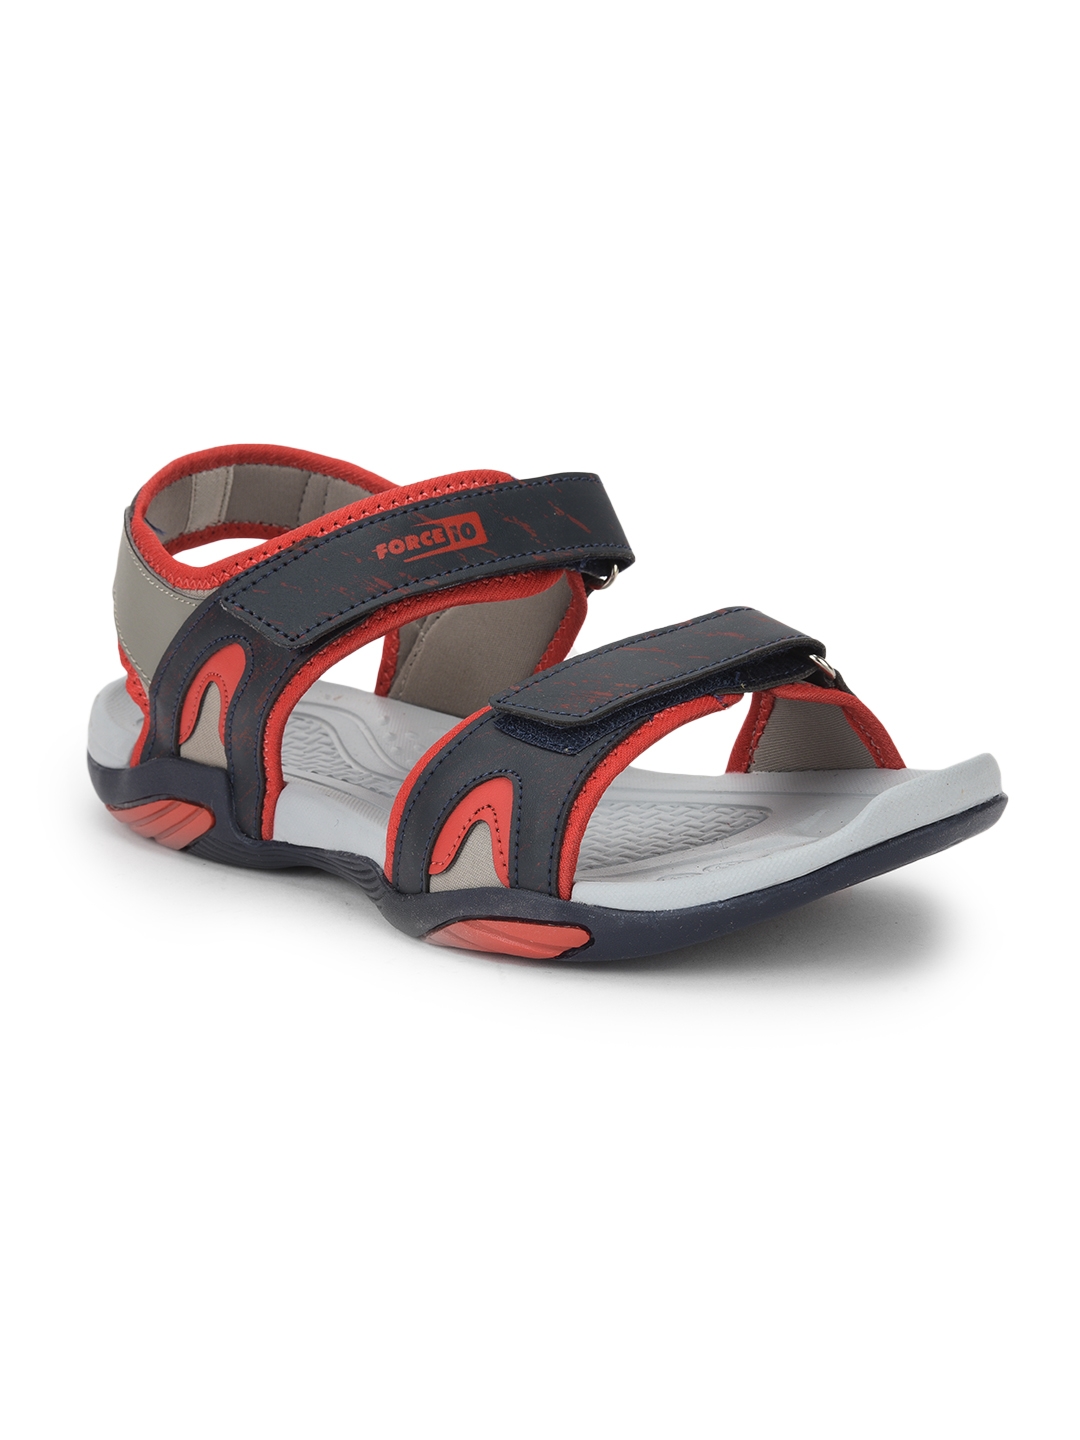 Liberty | Force 10 by Liberty Red Sandals GRACIA-04E For :- Men